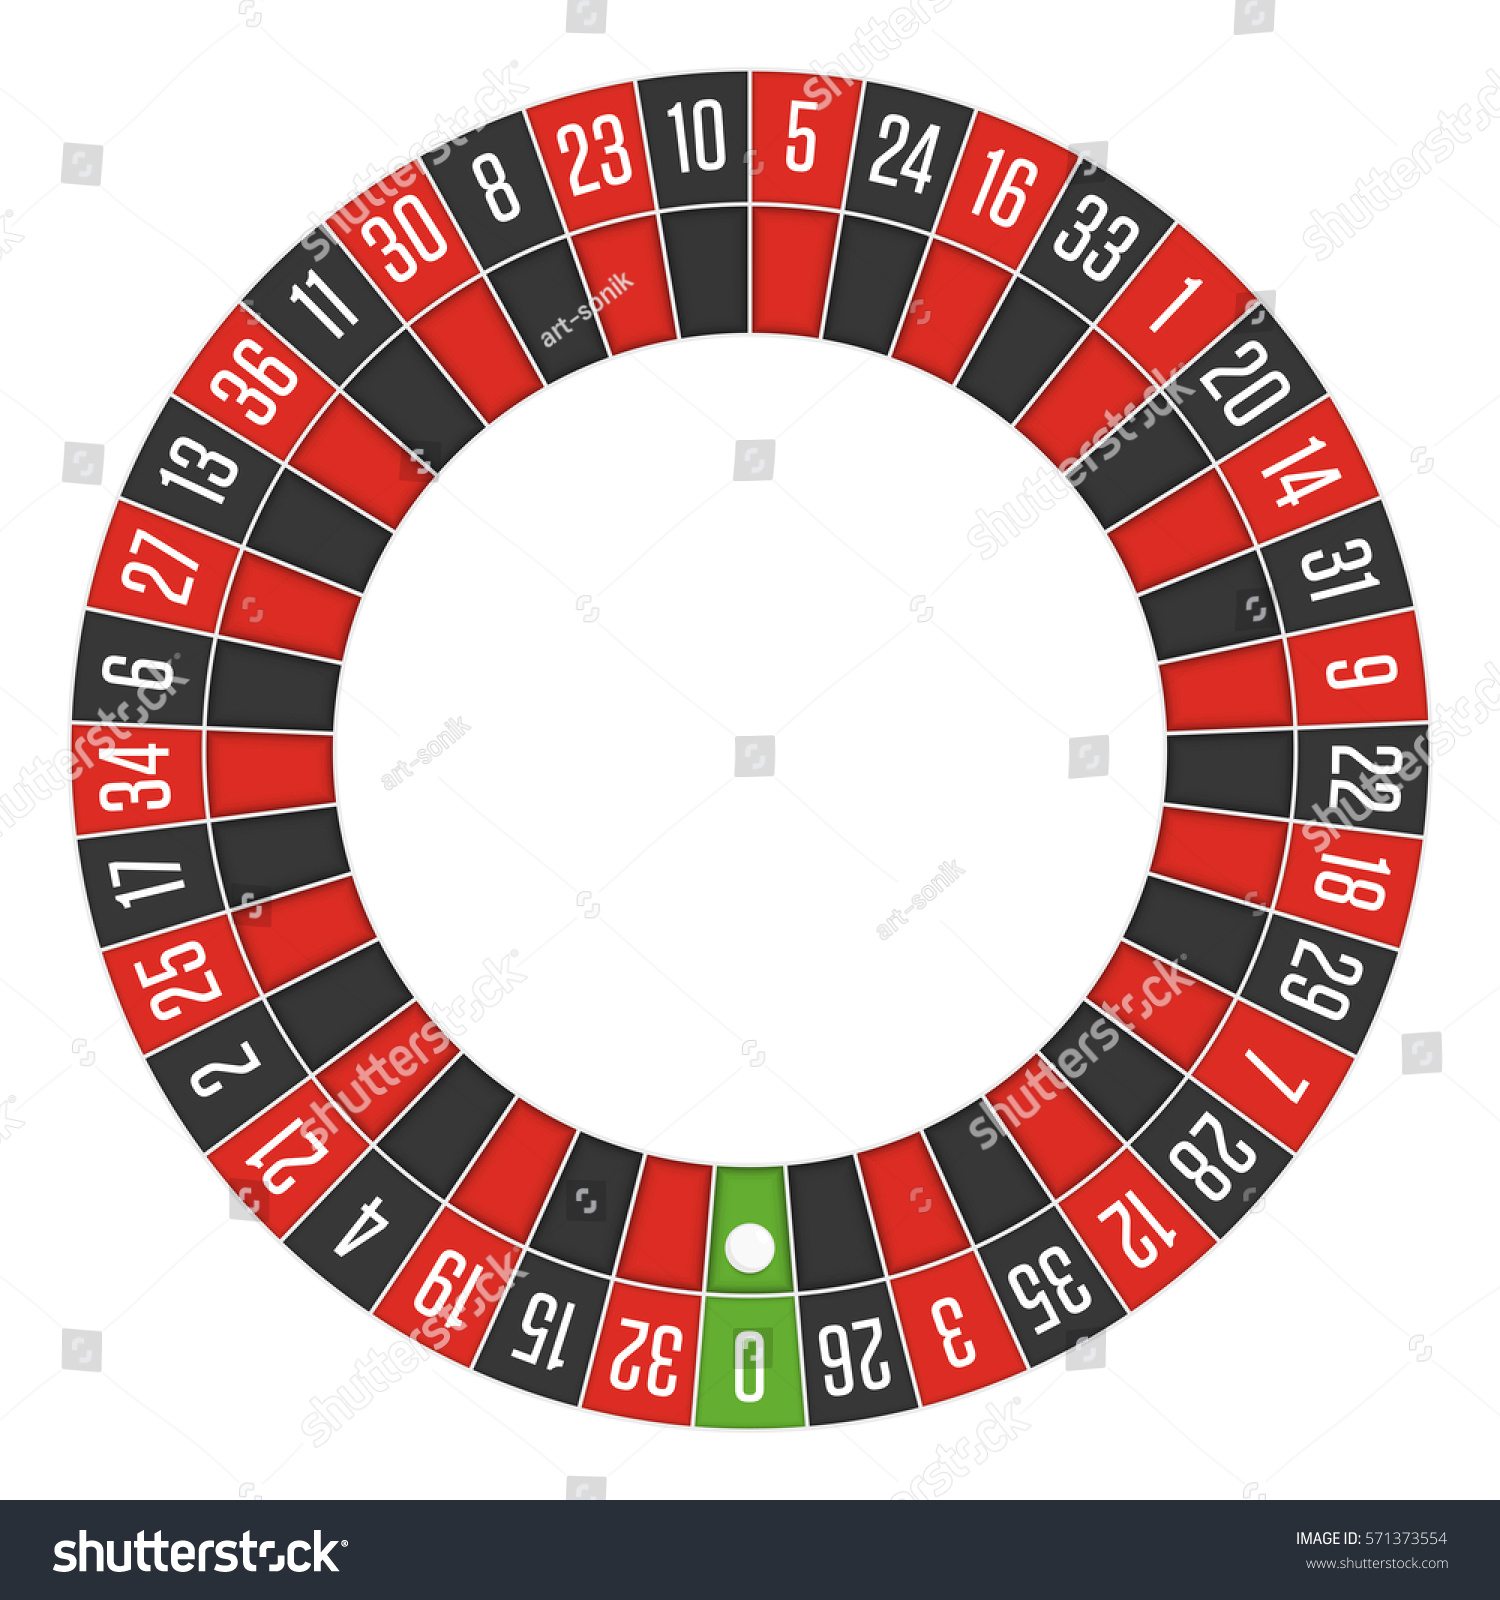 Roulette Tool - 990291